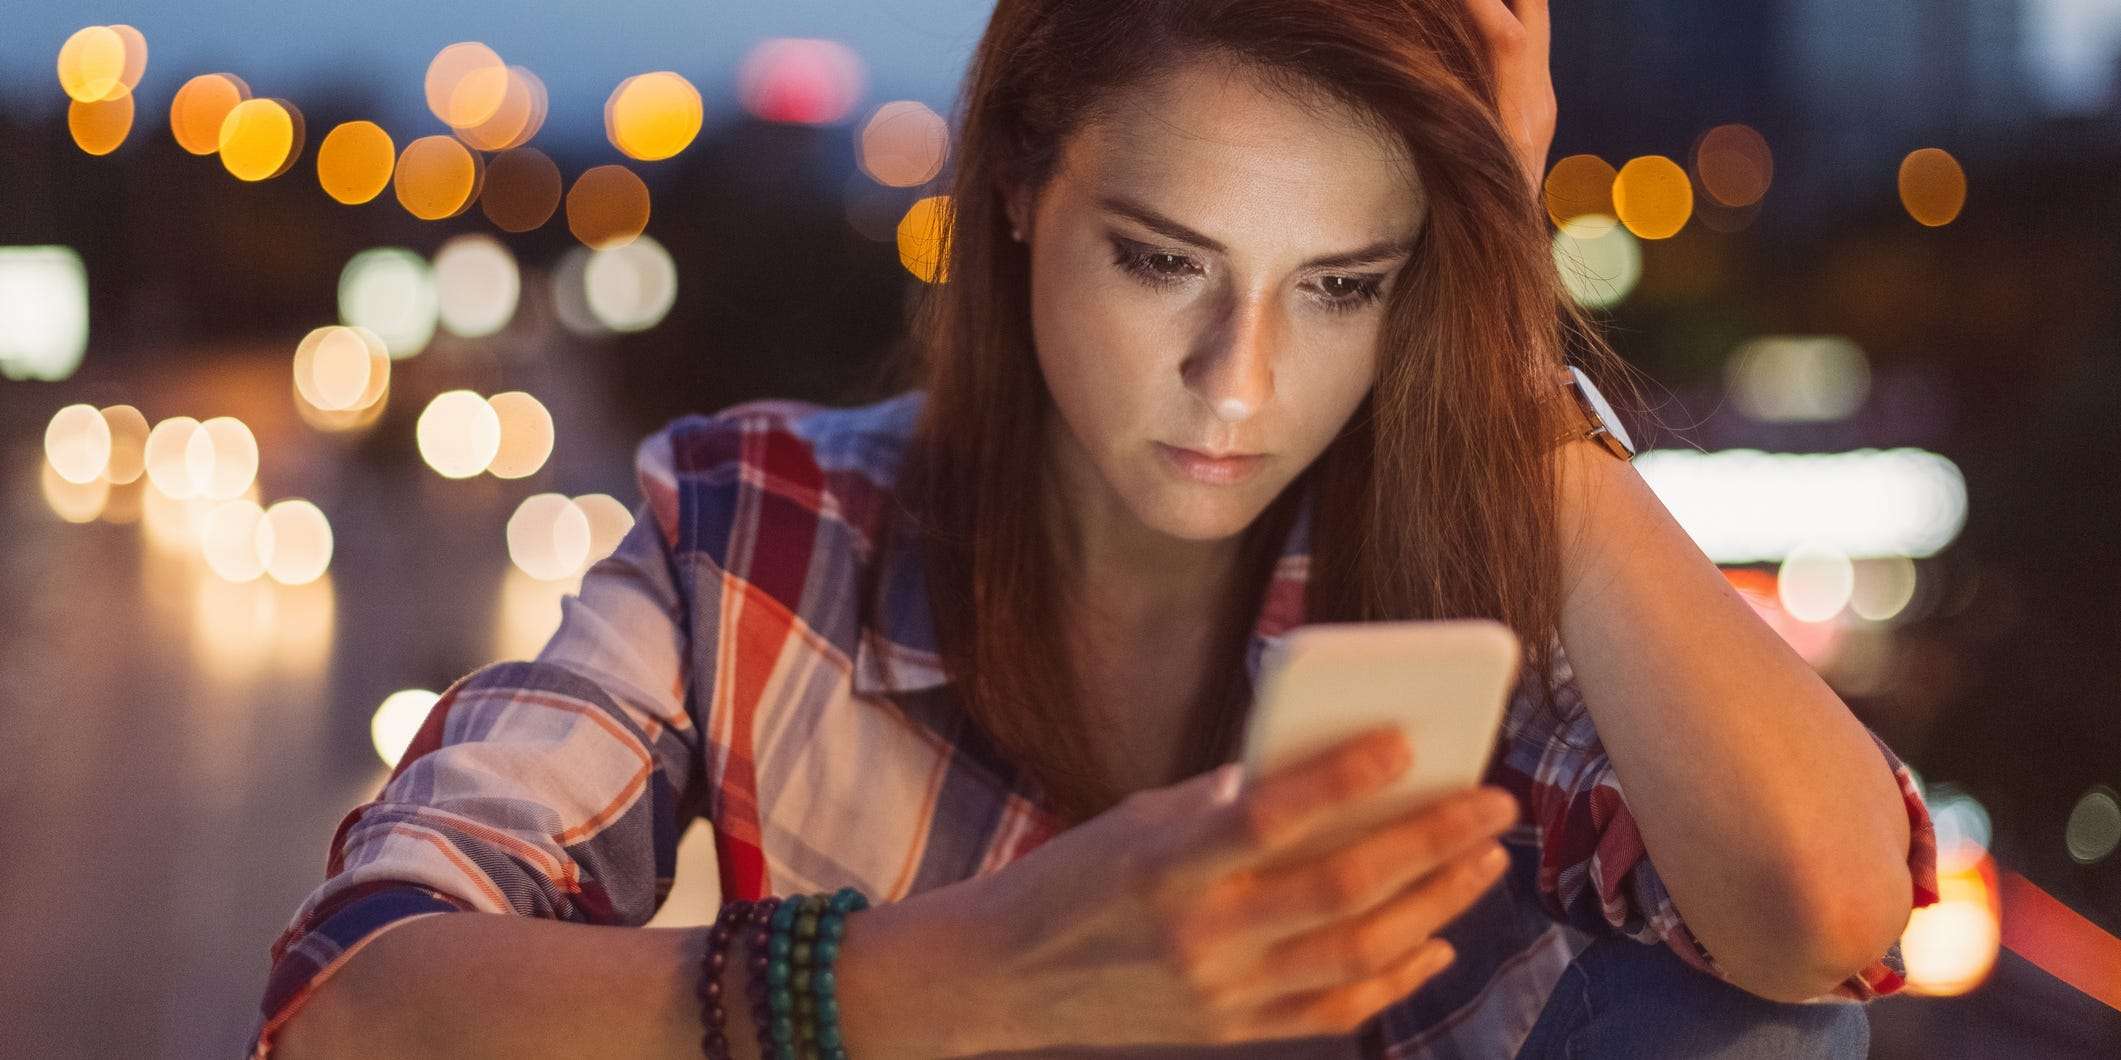 Why social media can make you feel bad about your body ...